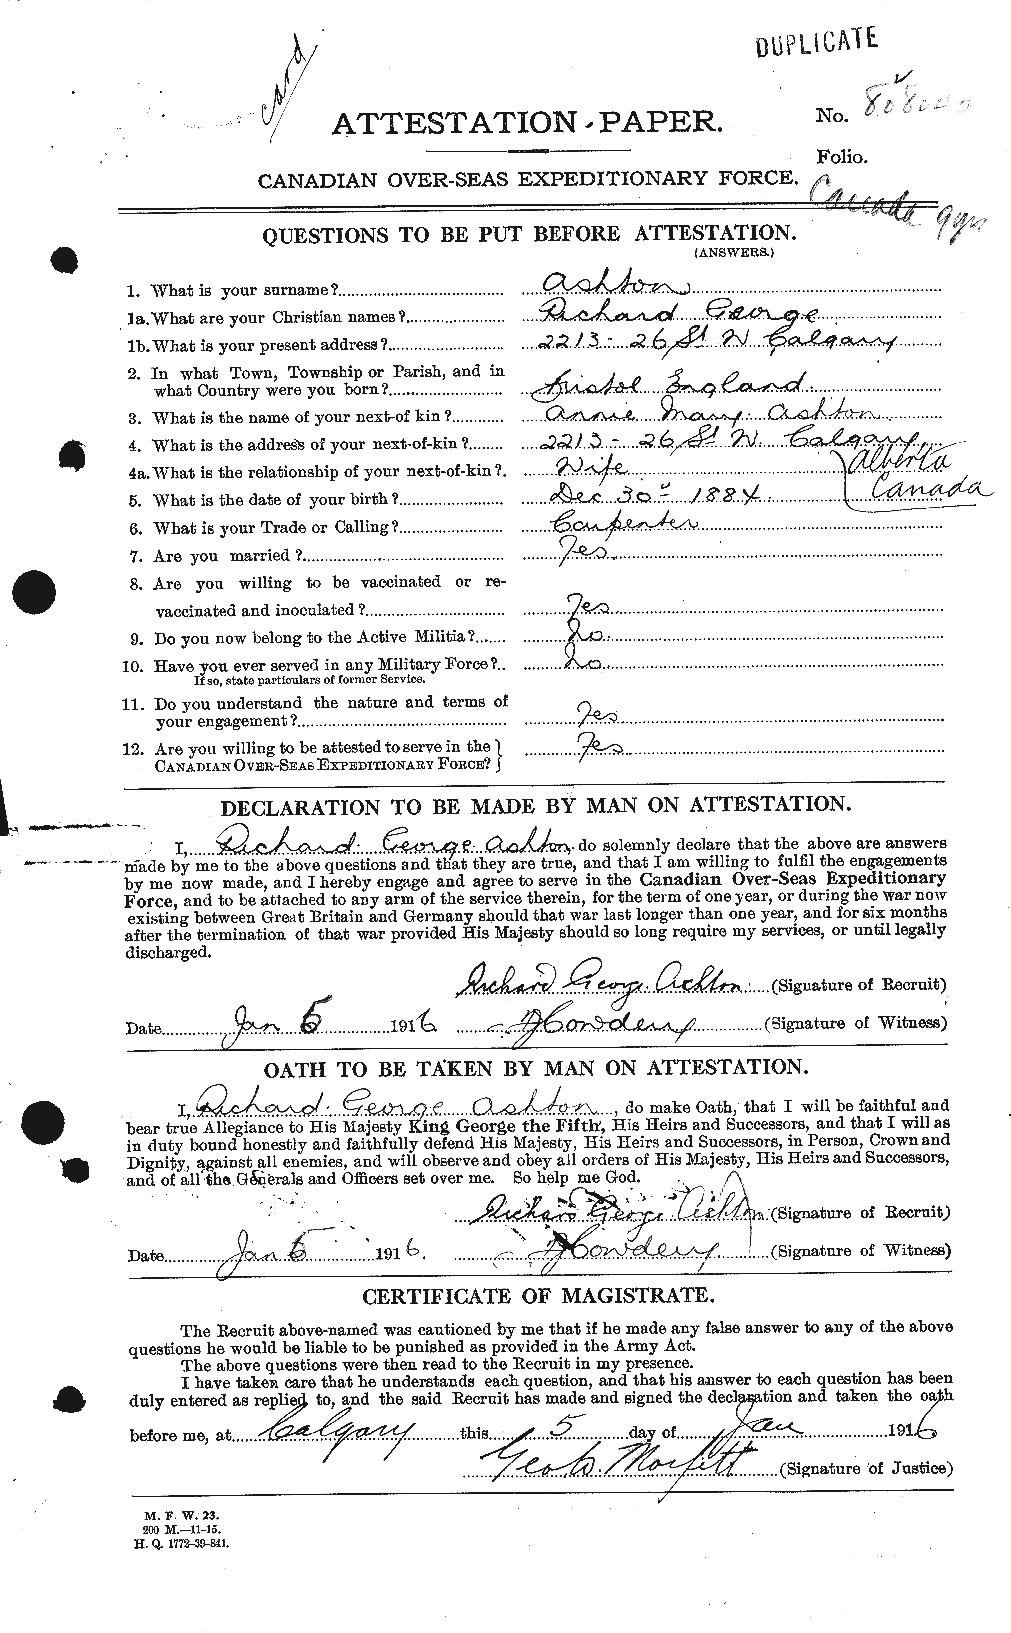 Personnel Records of the First World War - CEF 223817a